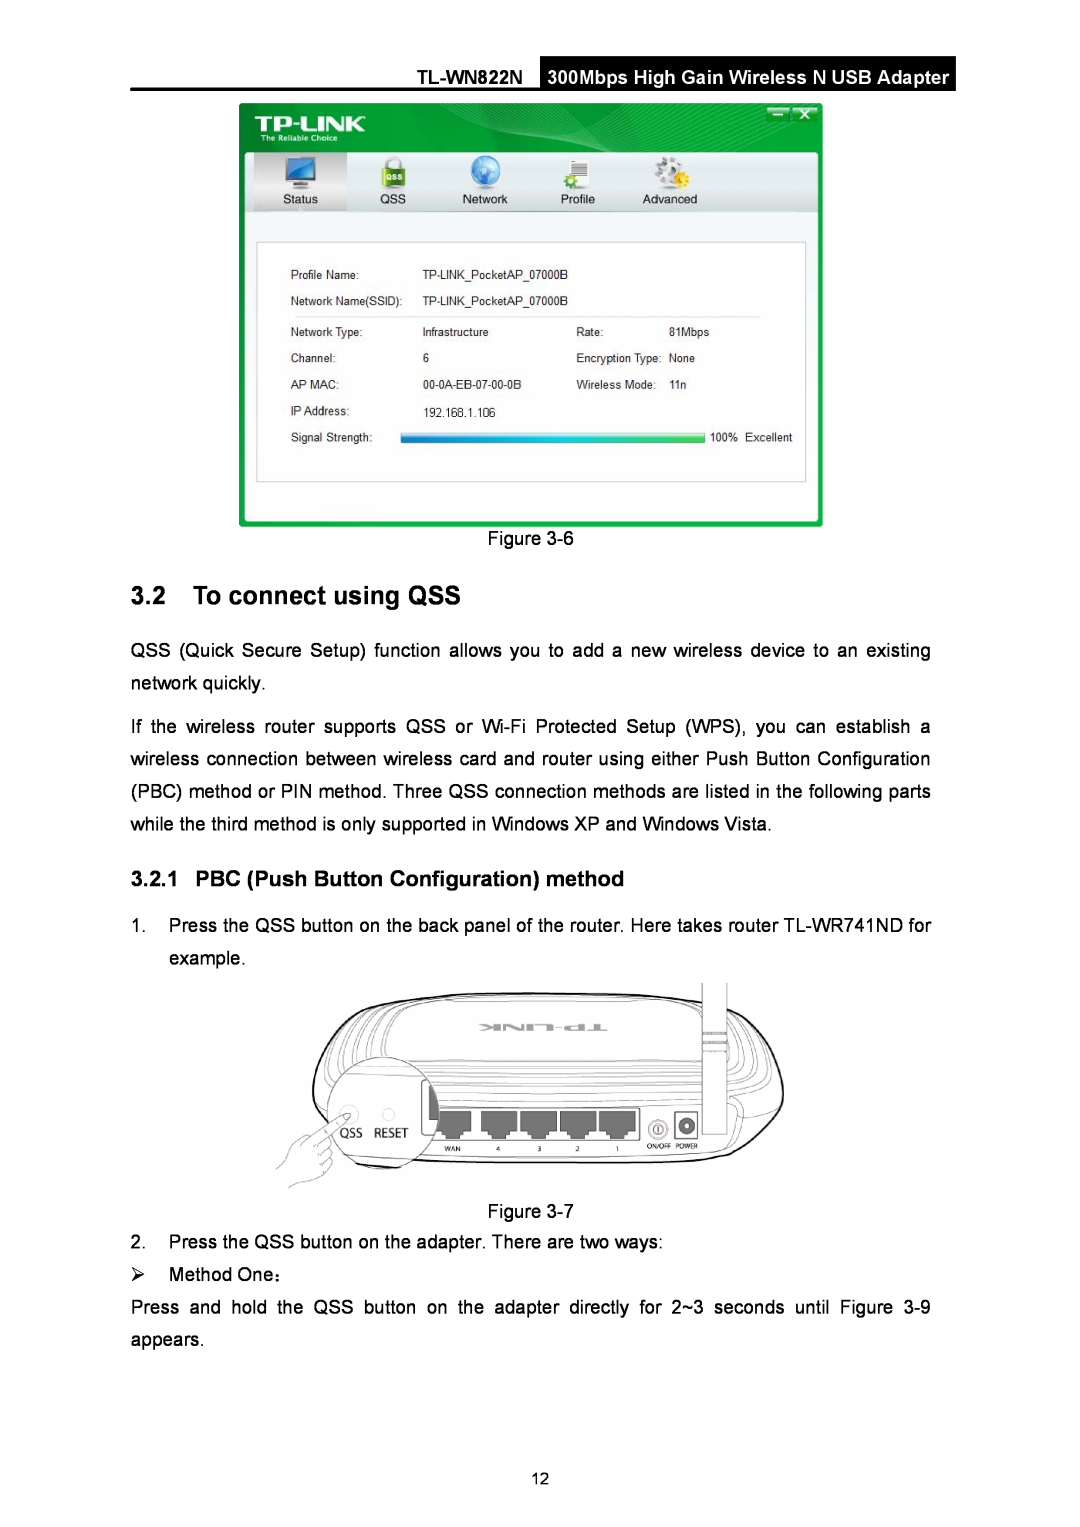 TP-Link TL-WN822N manual To connect using QSS, PBC Push Button Configuration method 